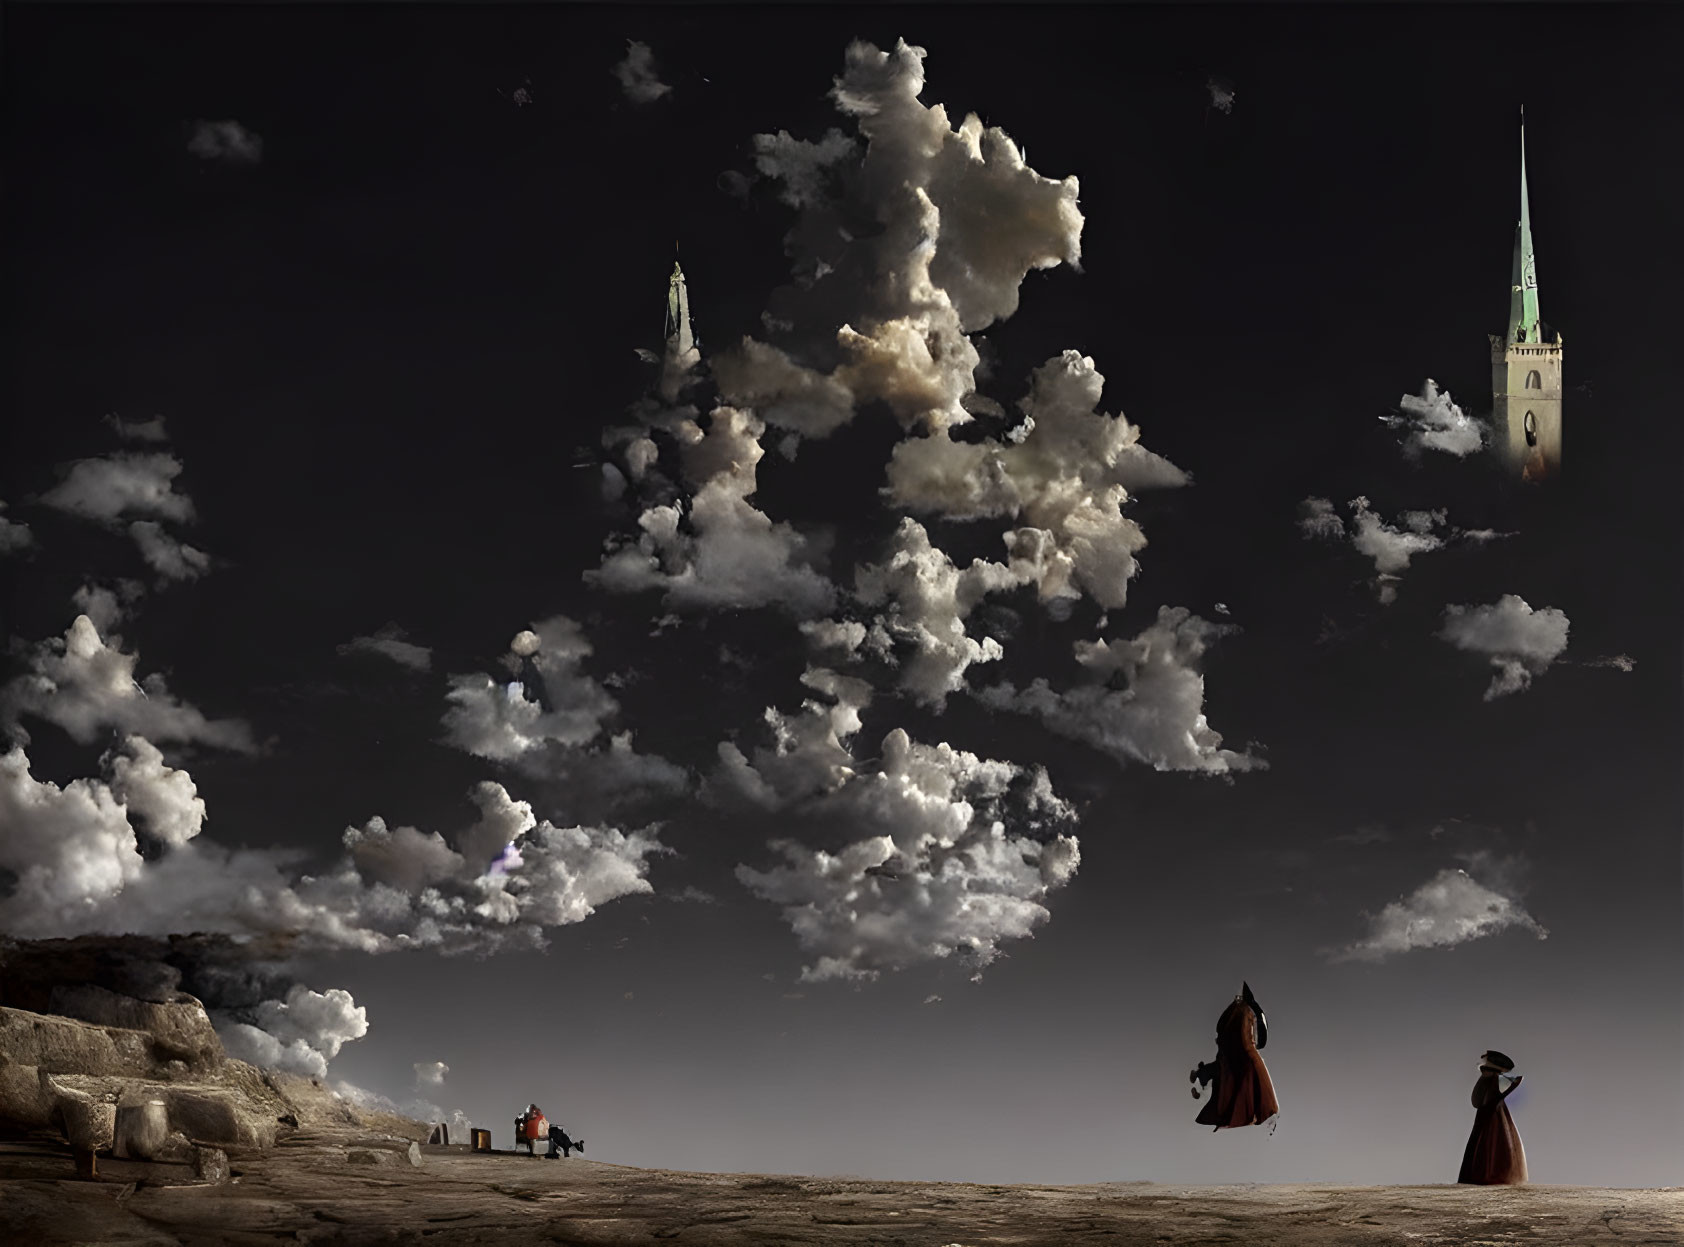 Surreal landscape: cloudy sky, church spires as clouds, period-dressed people, rocky